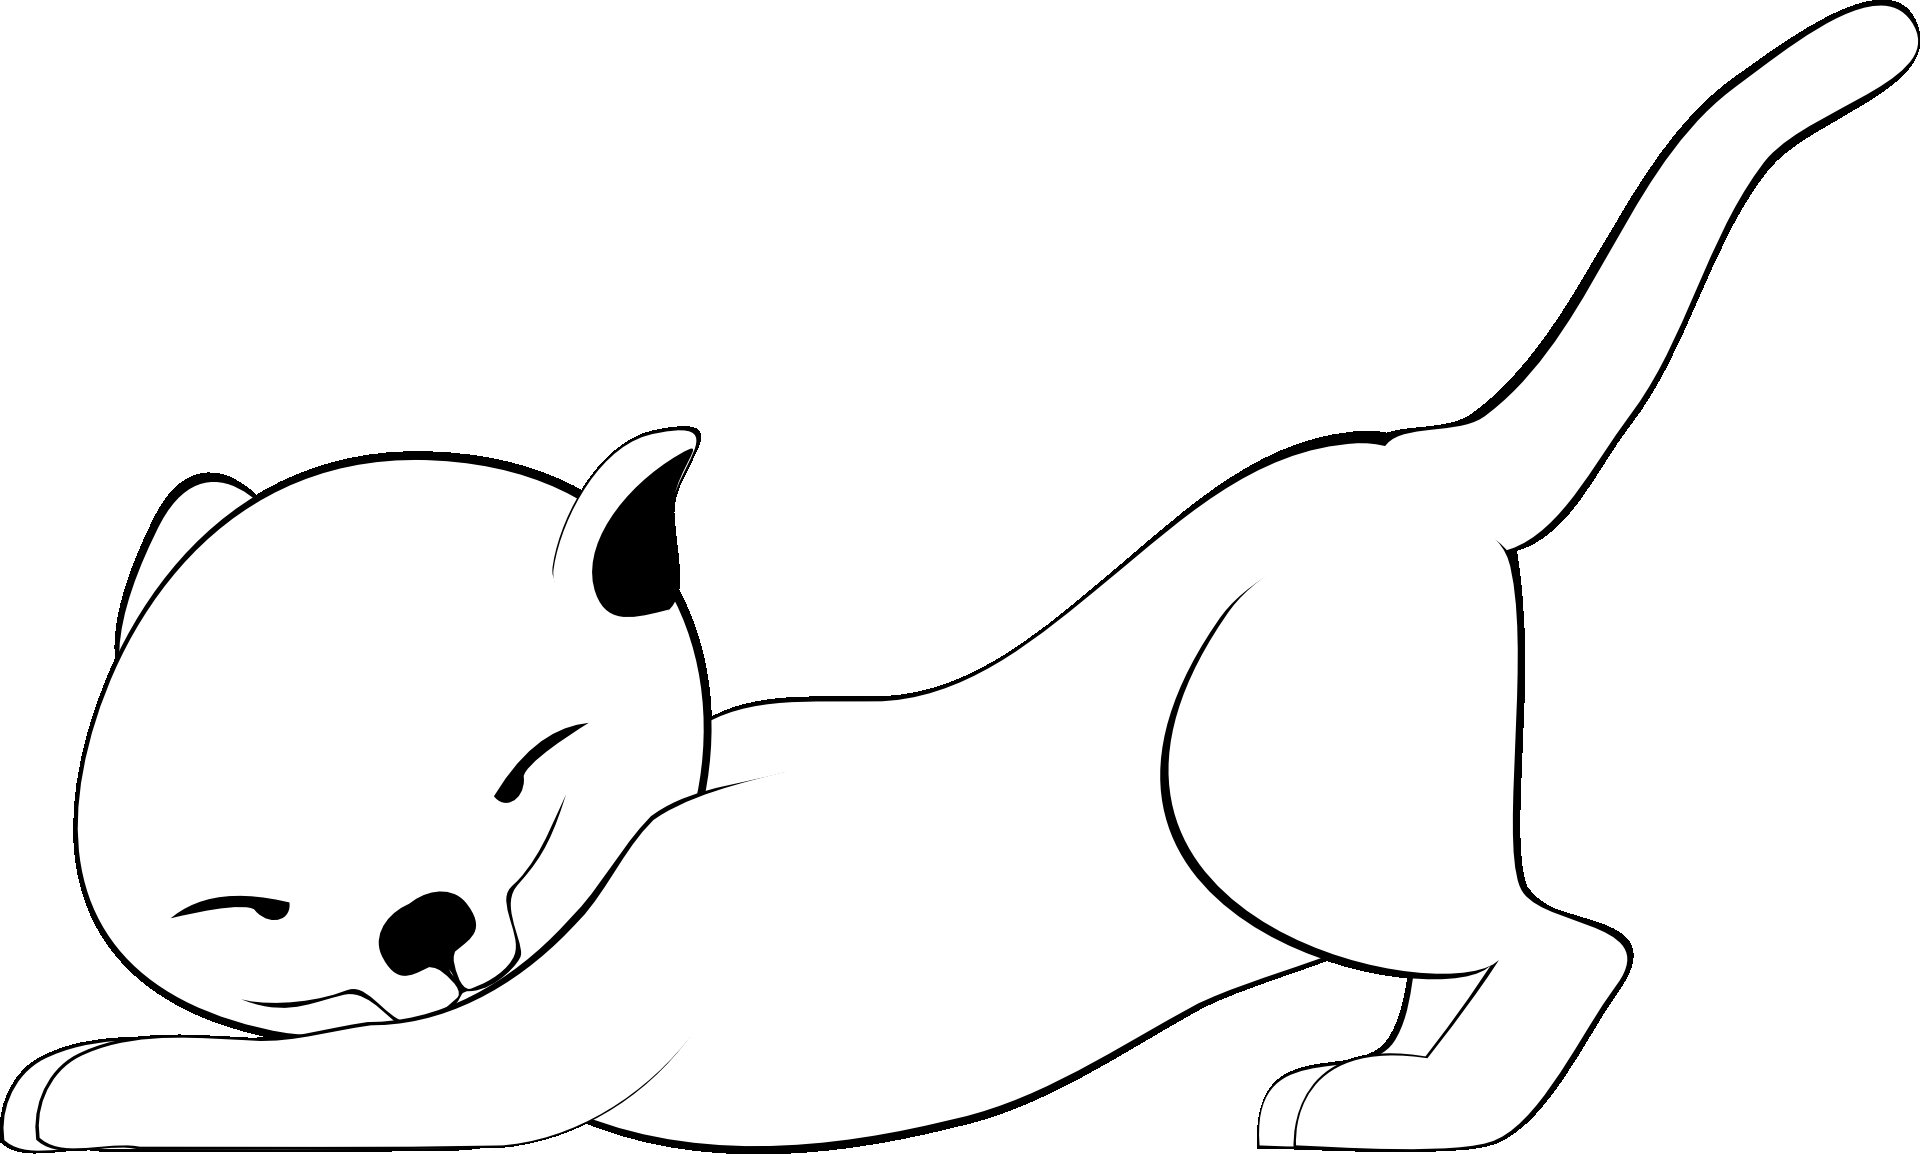 Naughty white cat coloring page